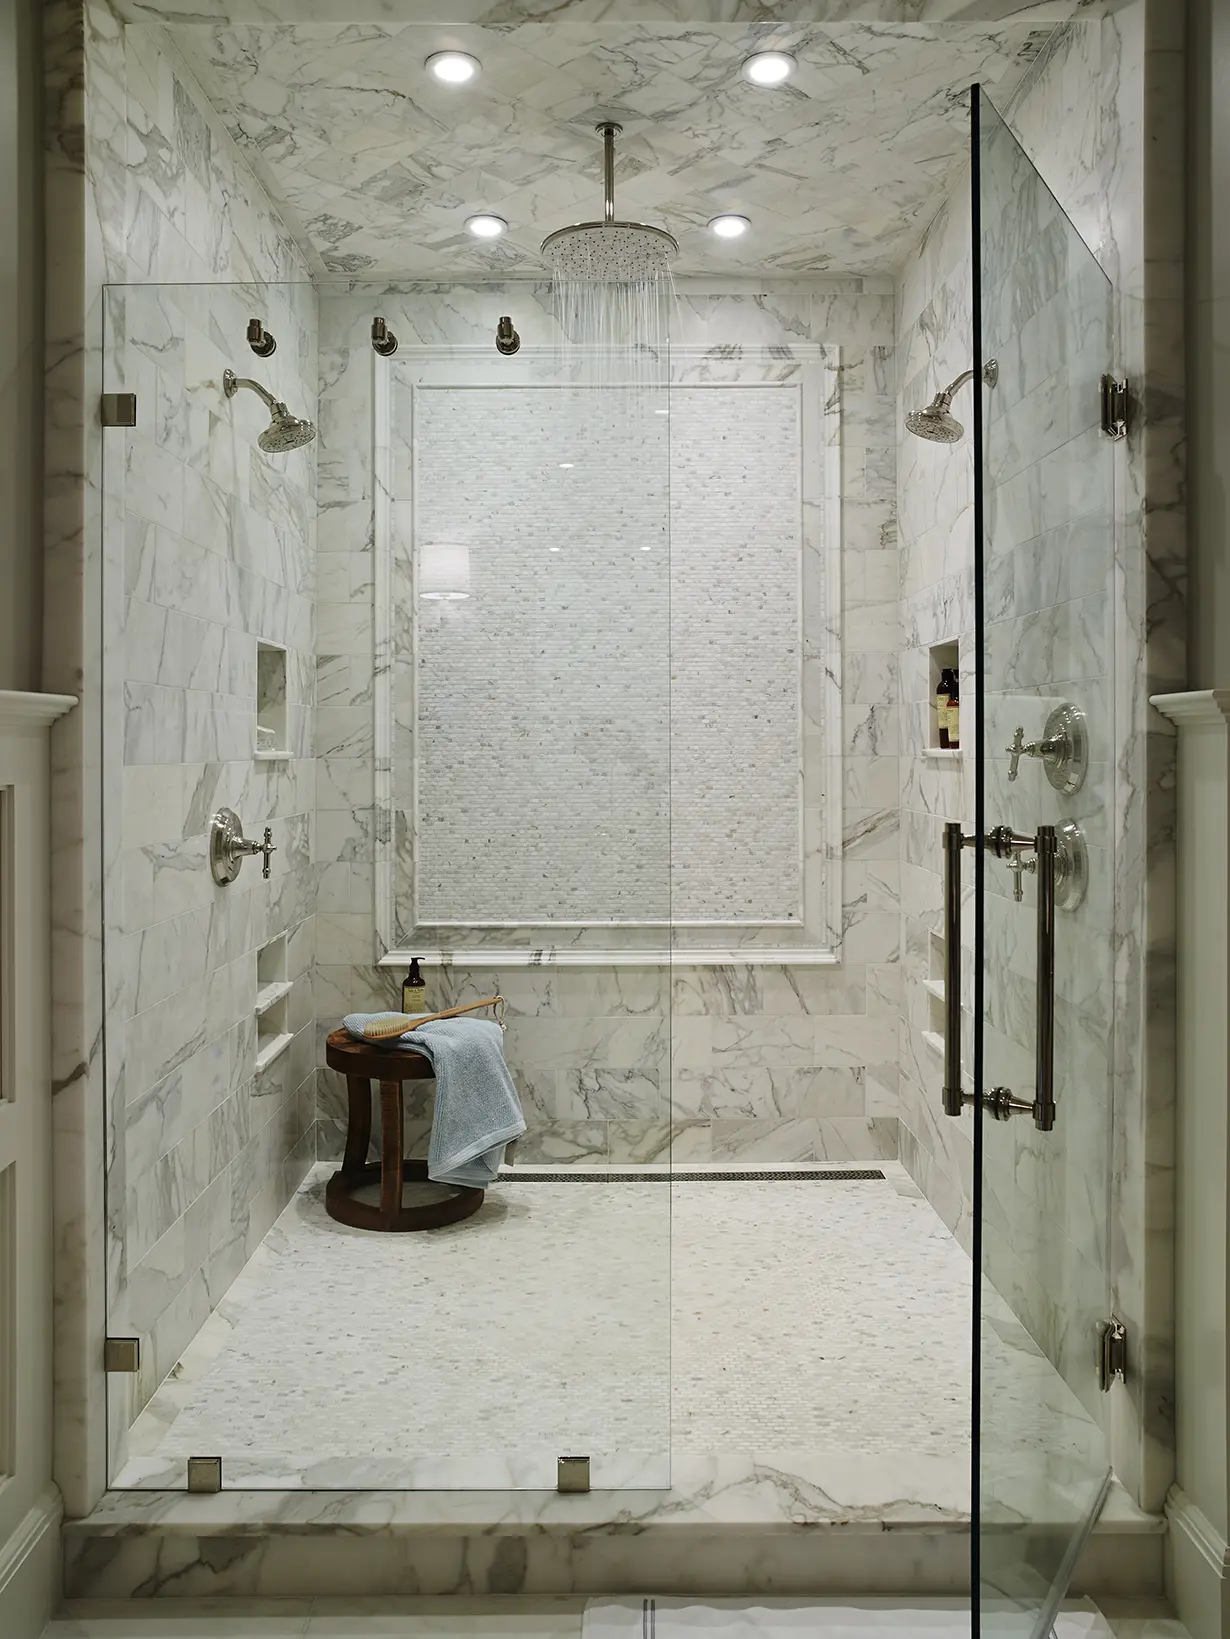 Walk in shower with tile detail and rain shower head